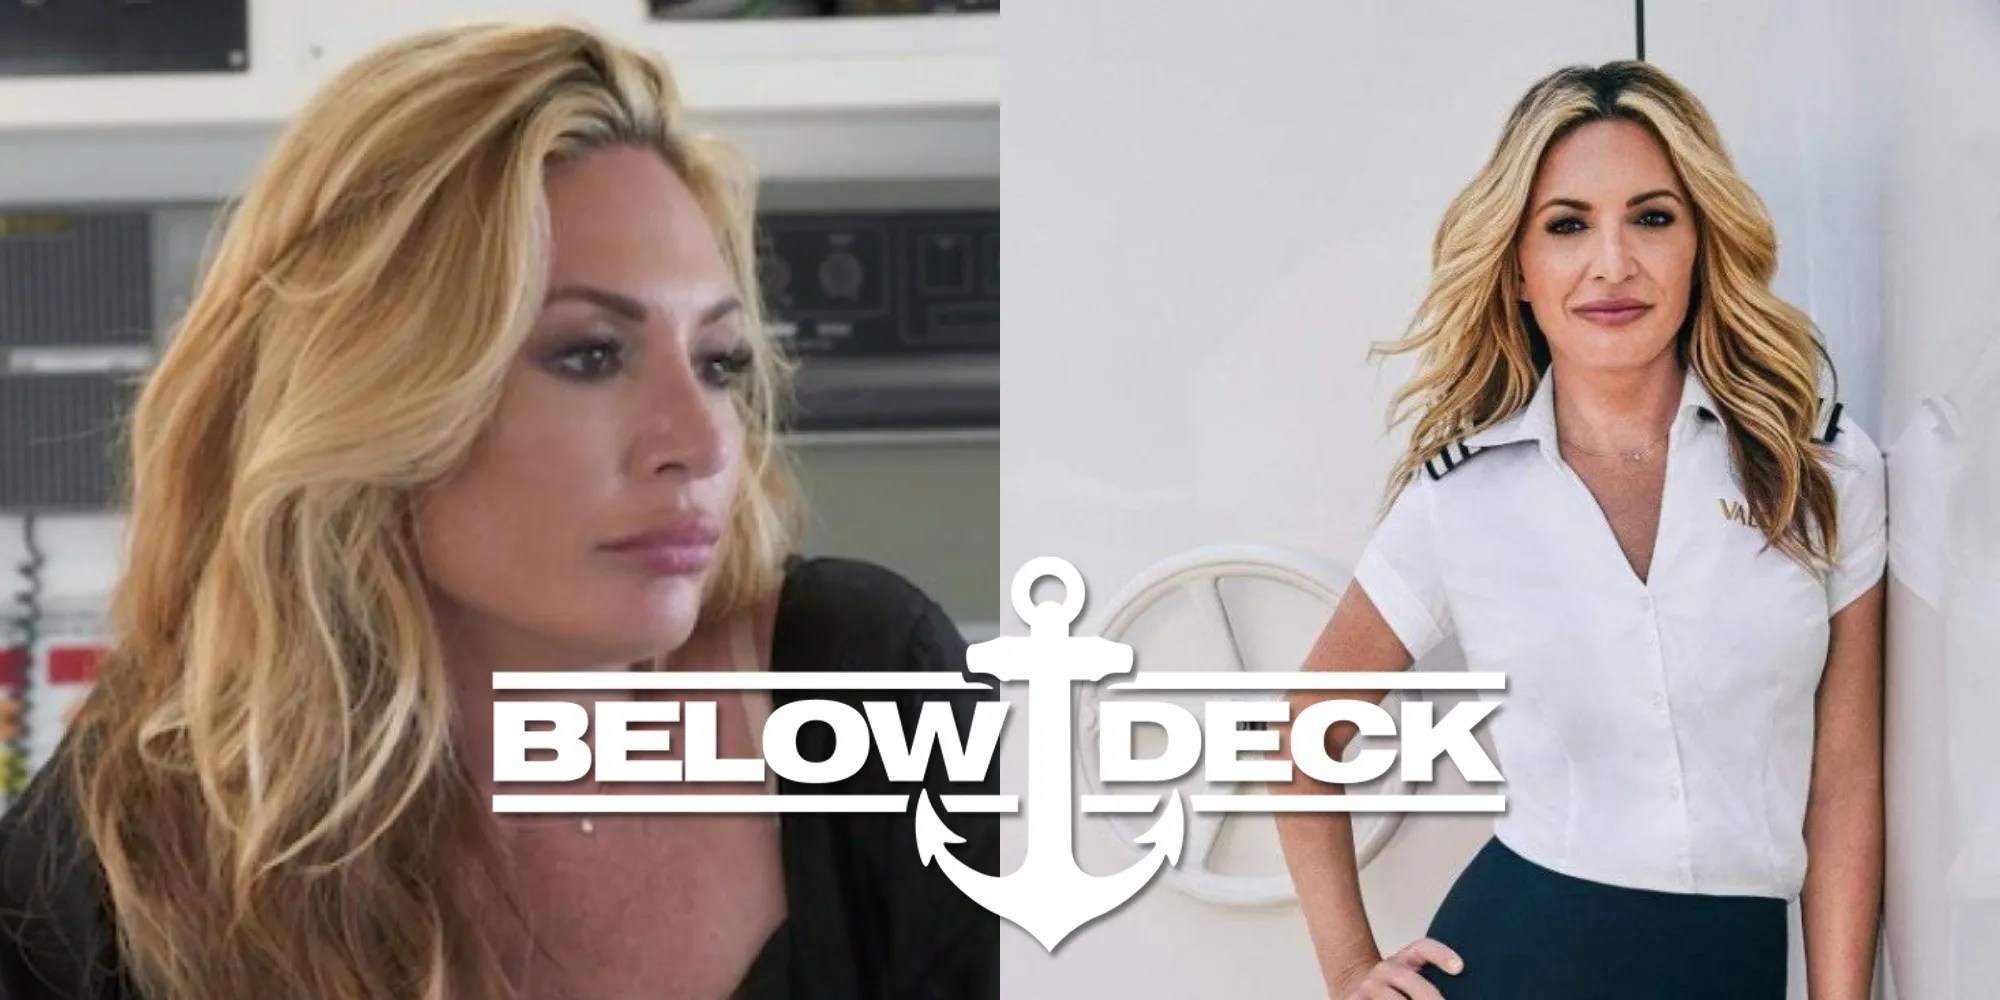 Below Deck What Happened To Kate Chastain After Season 7 (& Will She